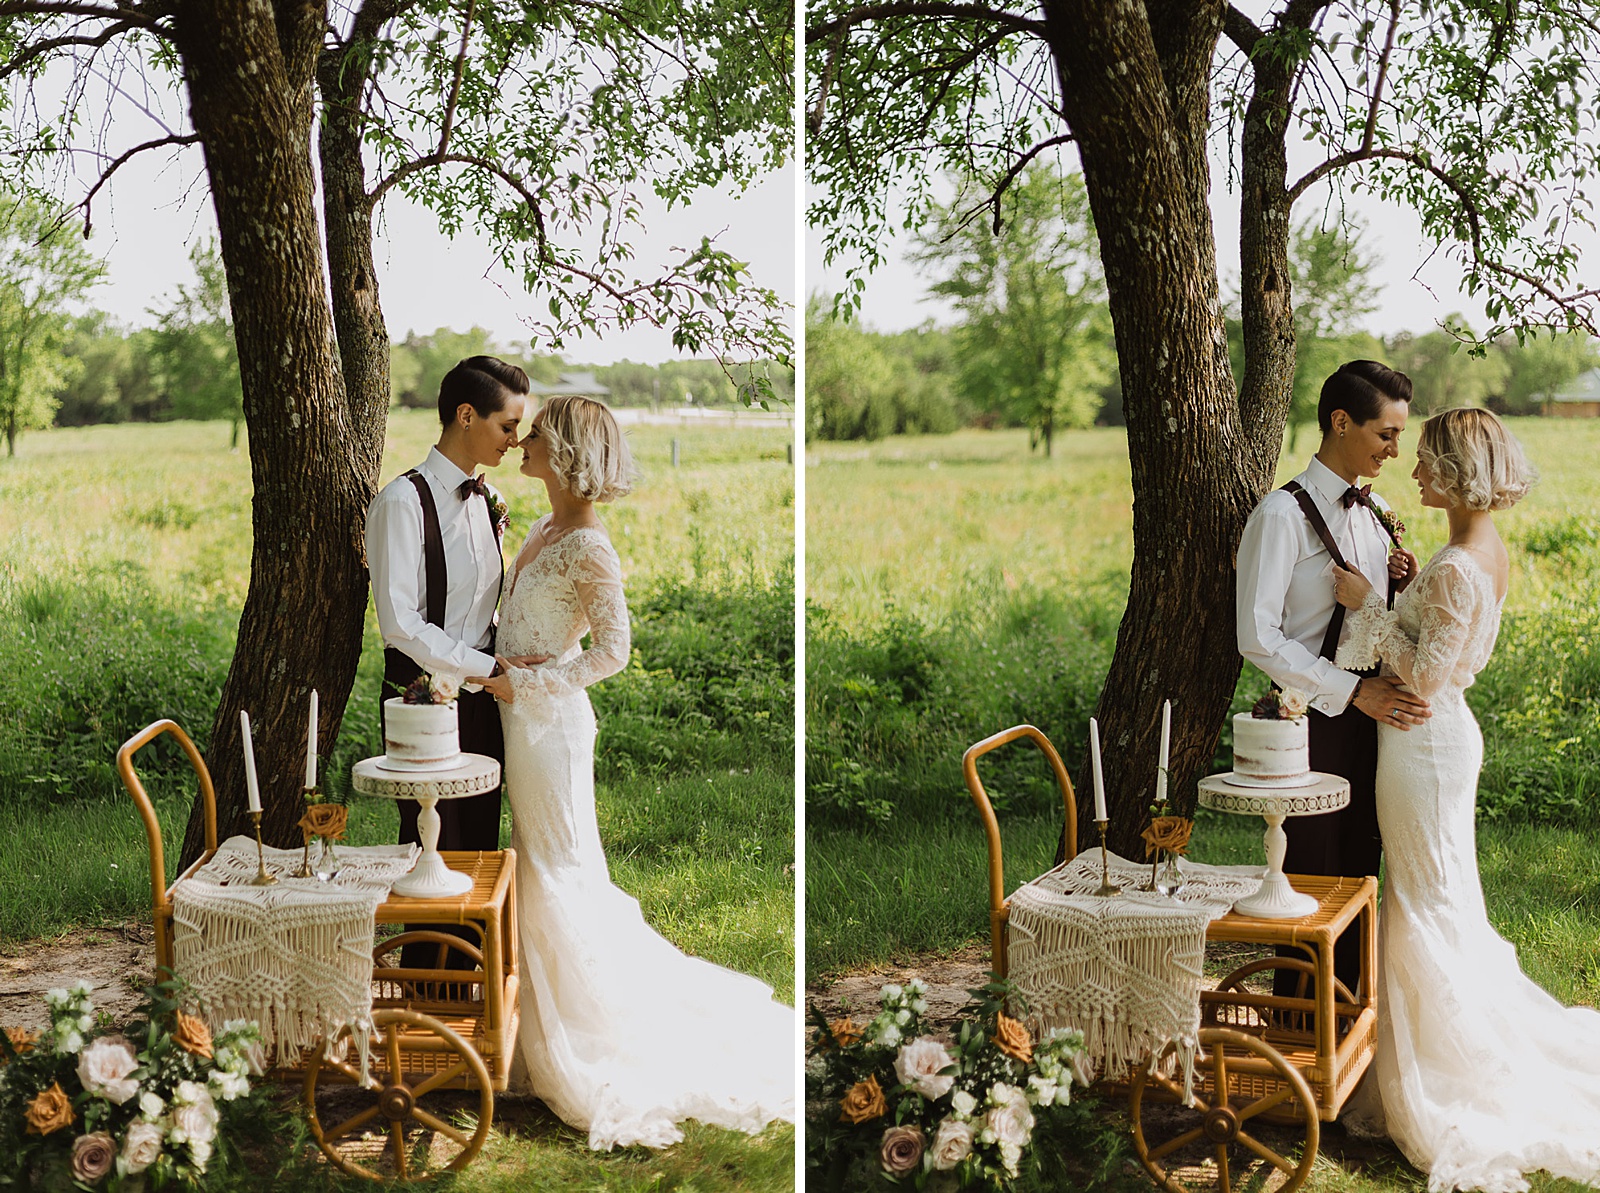 Couple at Dessert Cart Boho Kansas City Styled Elopement captured by Caitlyn Cloud Photography